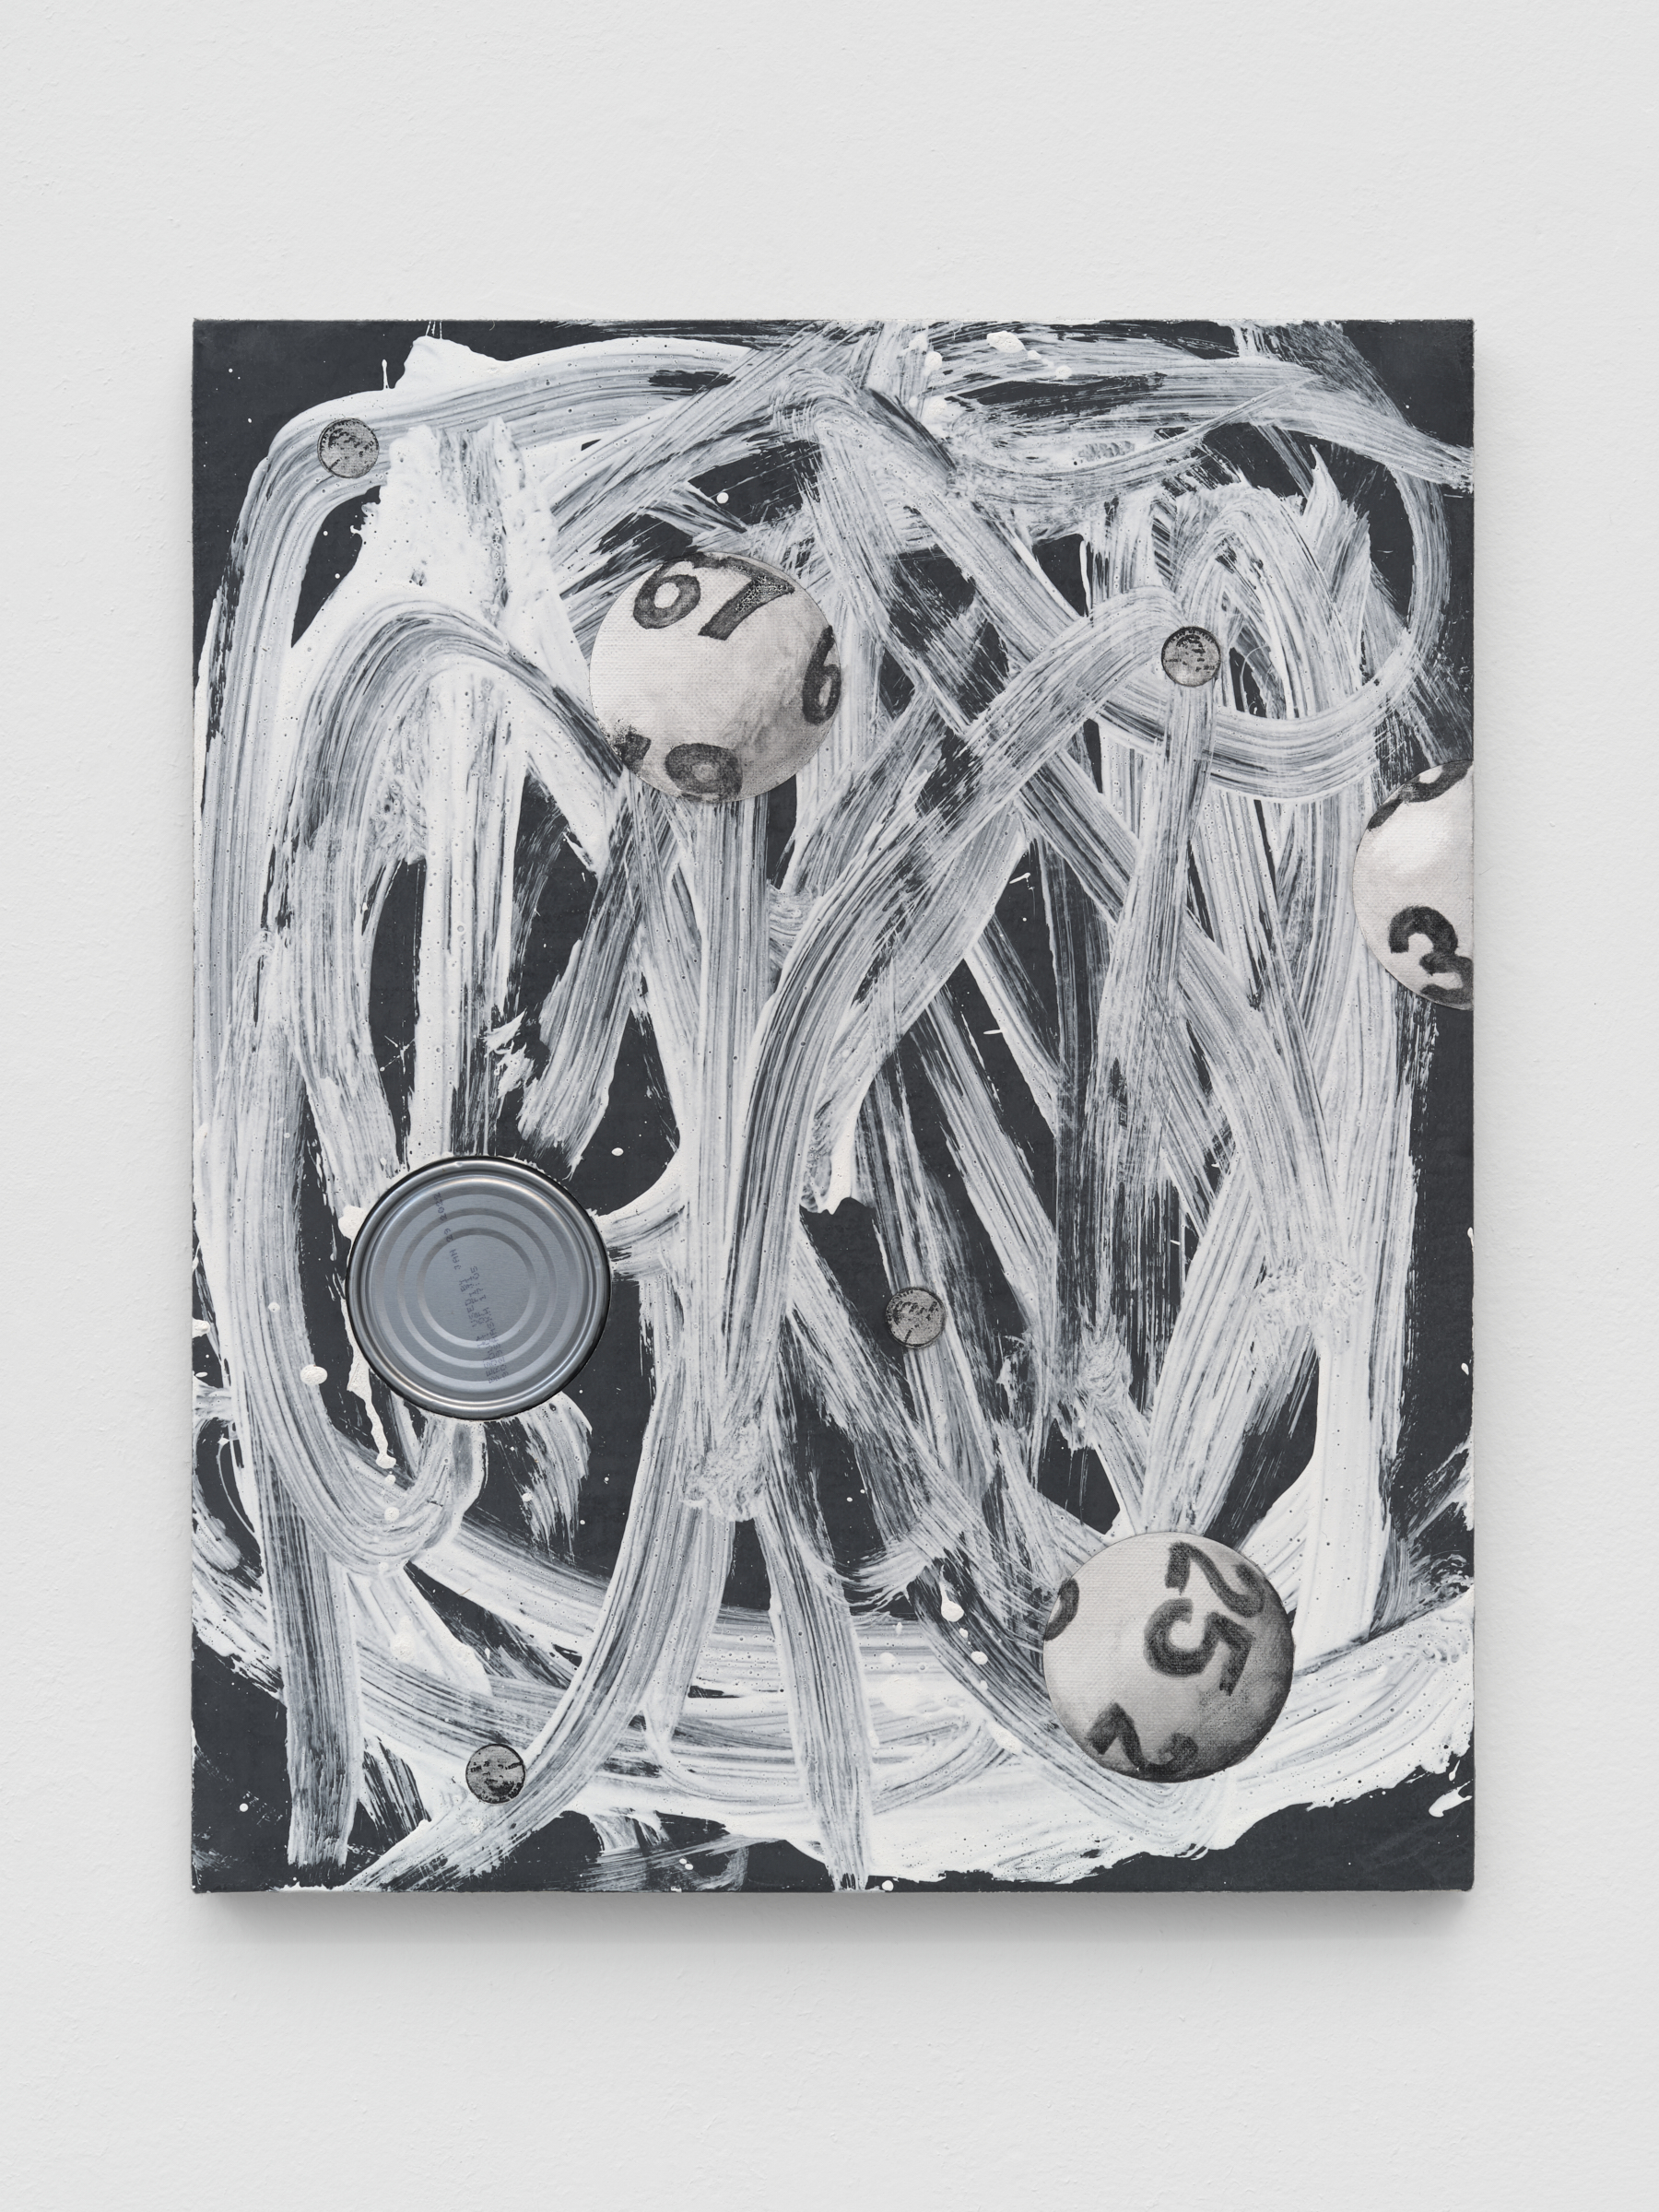 Alex Kwartler, However, (with tuna), 2021, Oil and plaster on linen with tin can, 20 x 16 in.